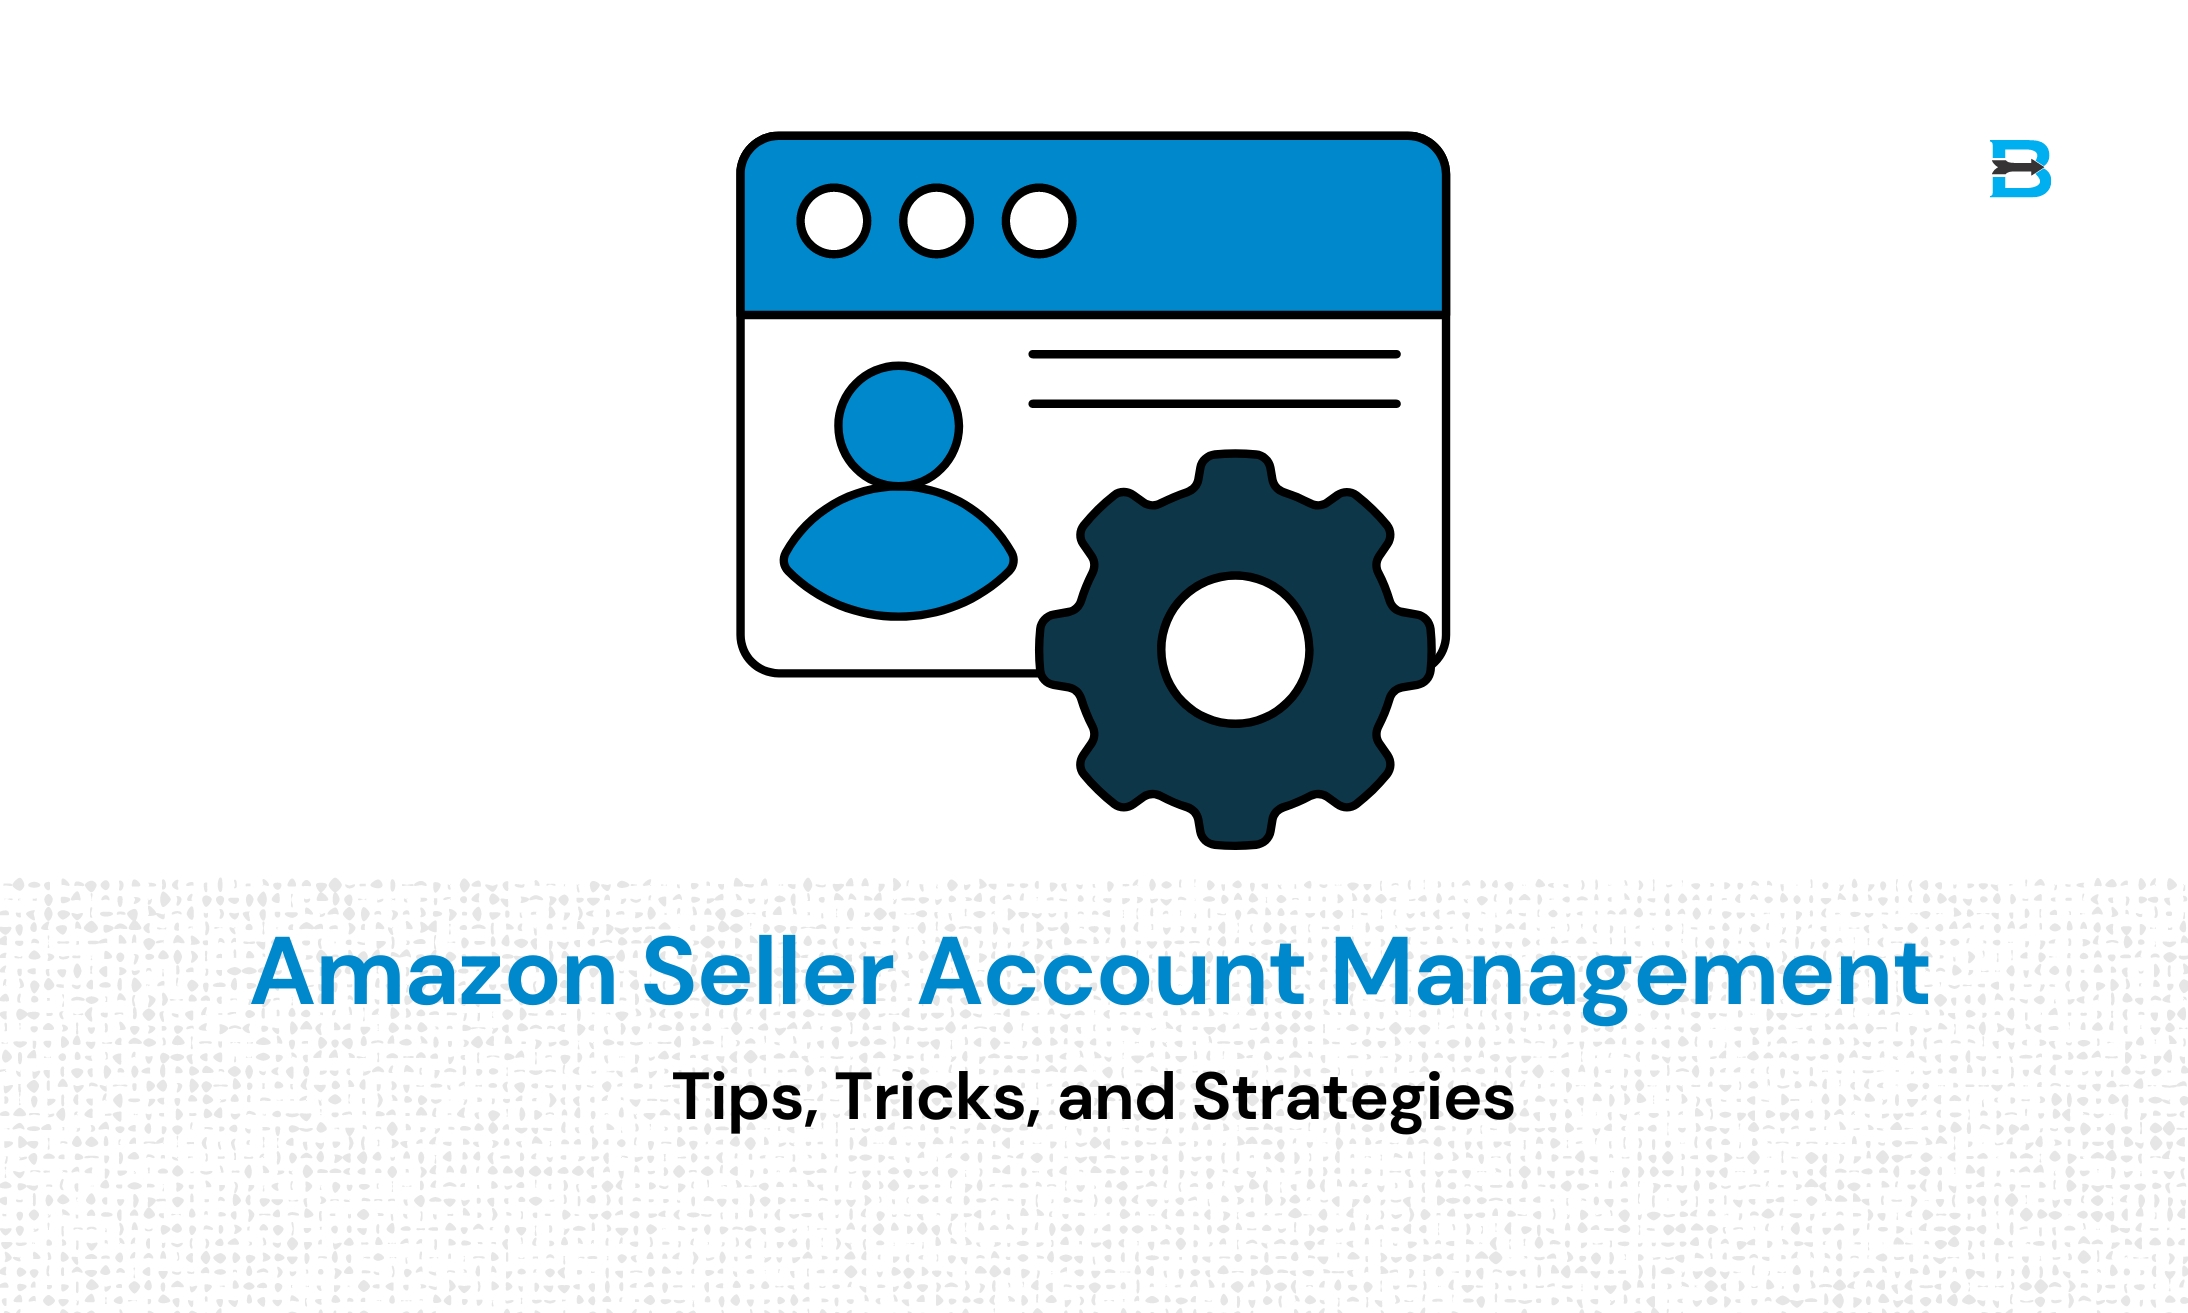 Amazon Seller Account Management Tips, Tricks, and Strategies